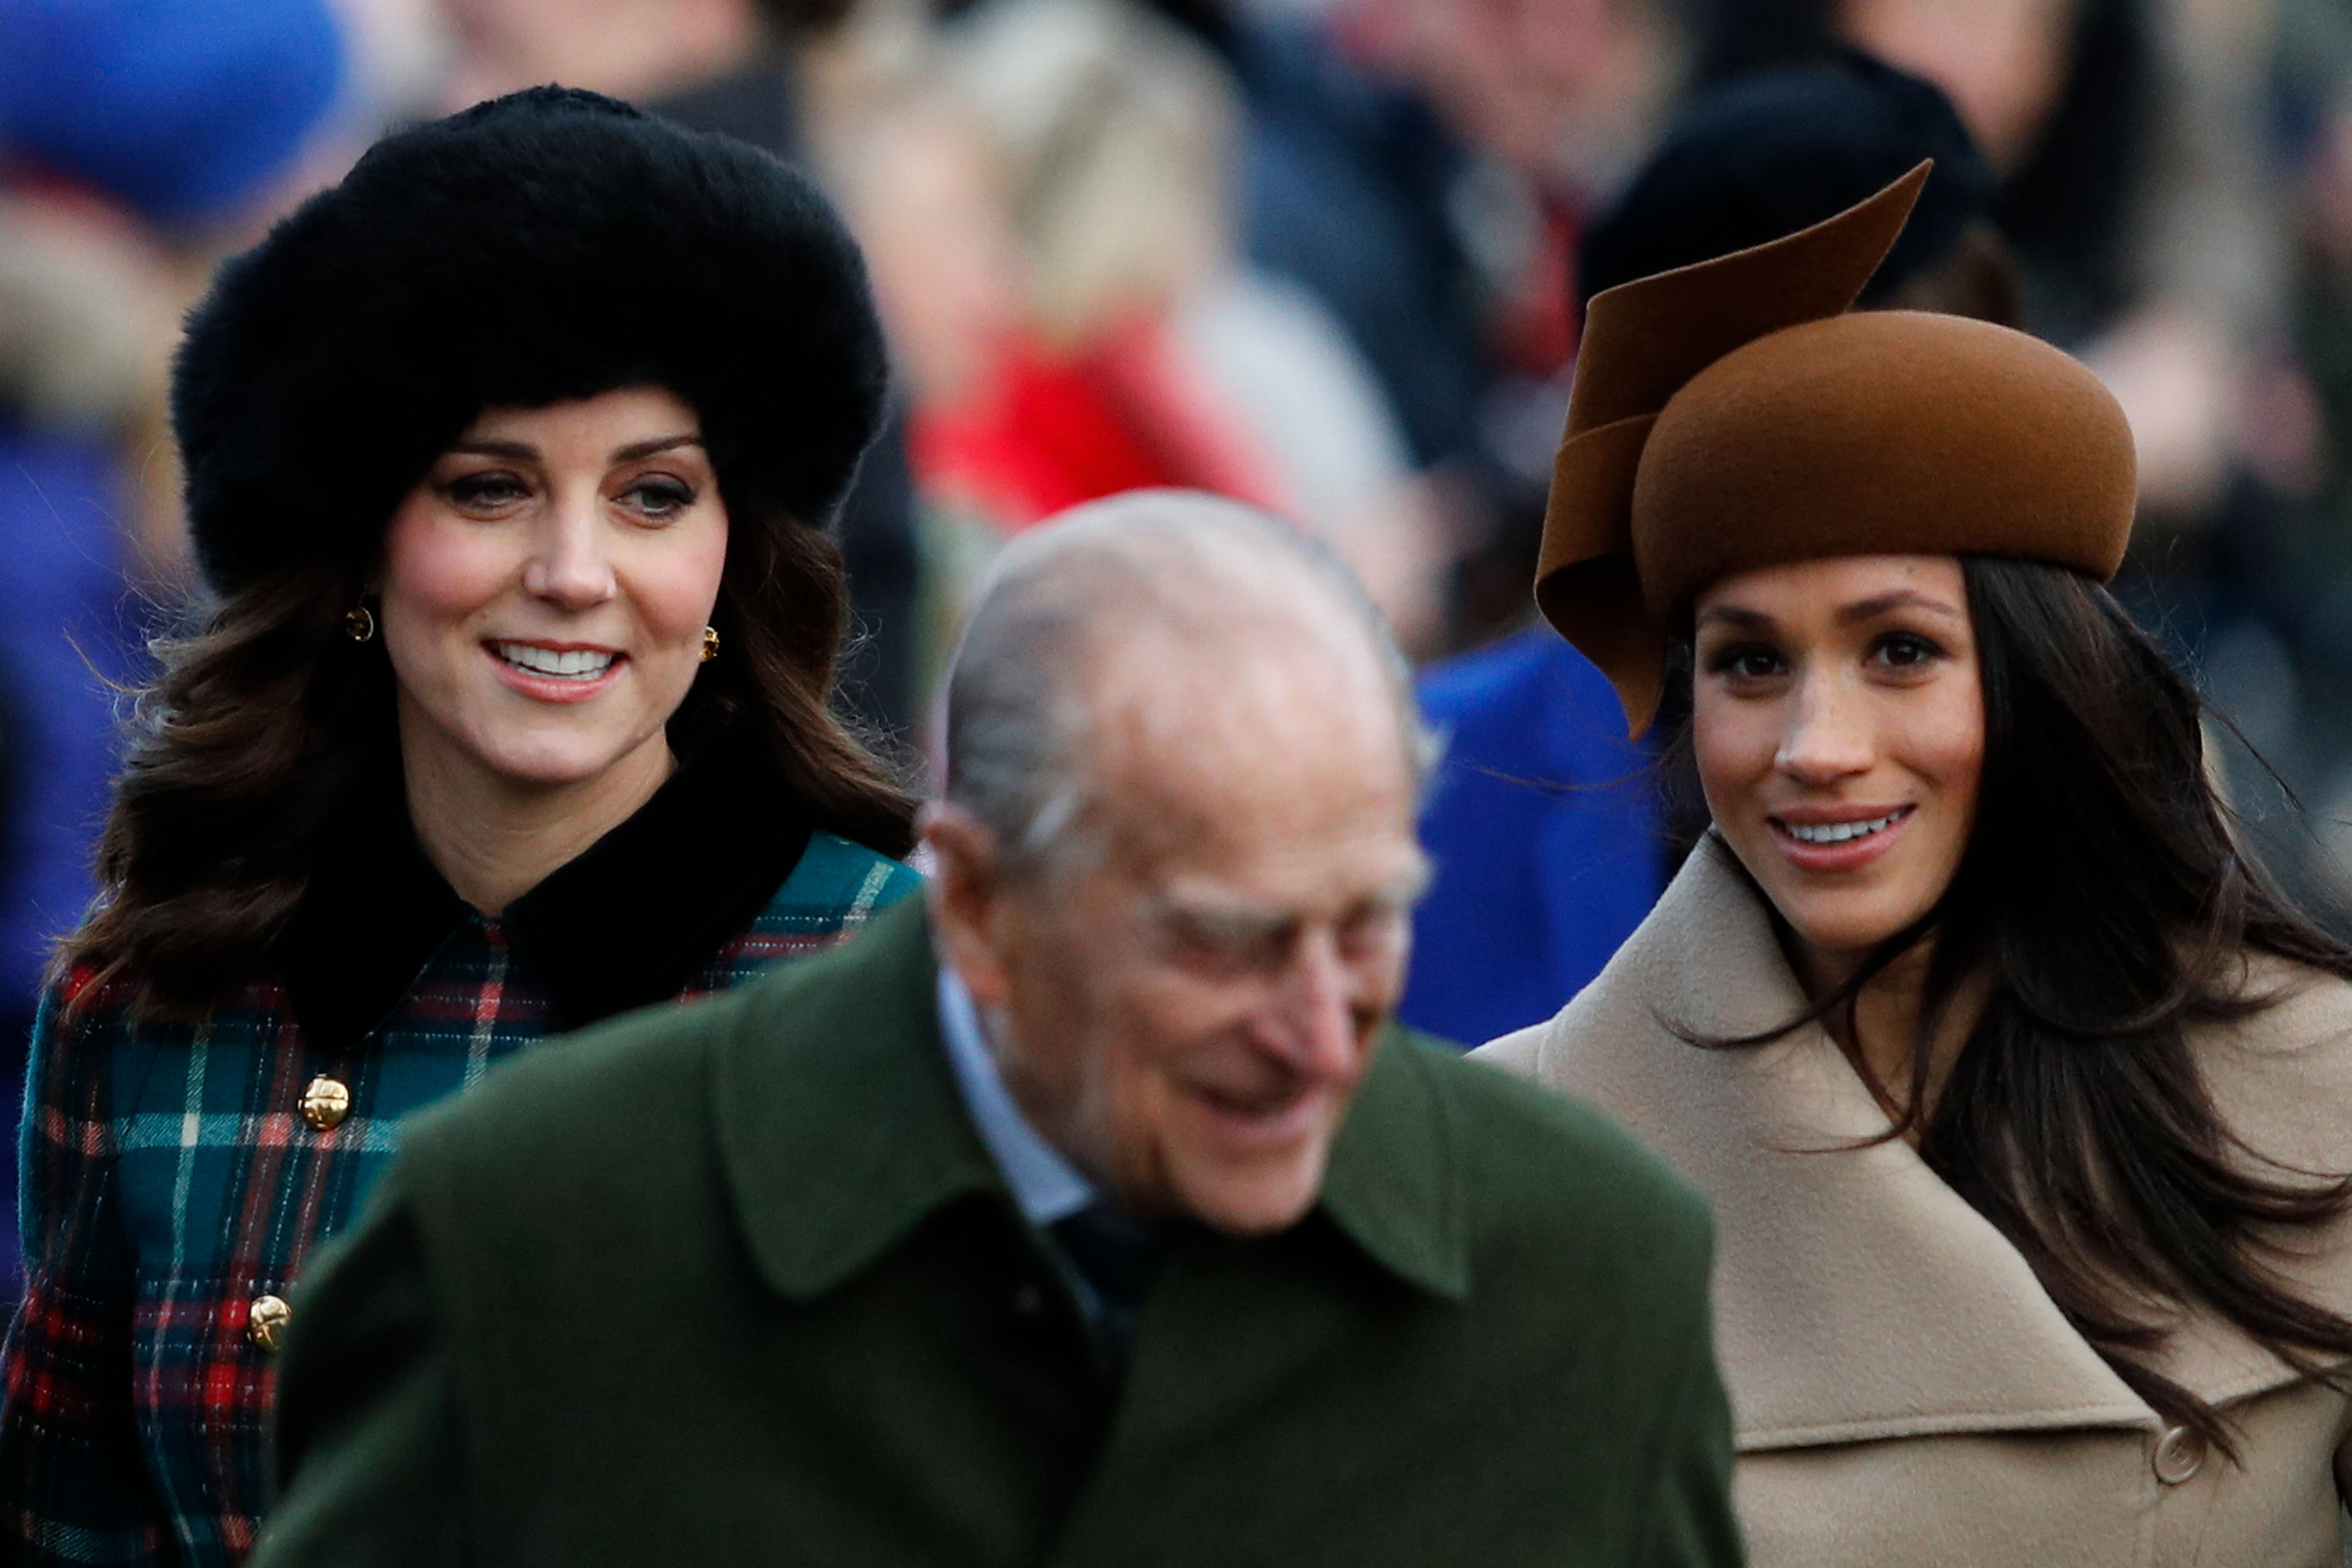 Duchess Kate, Prince Philip, and Meghan Markle at the Royal Family's traditional Christmas Day church service in Sandringham, Norfolk, on December 25, 2017. | Source: Getty Images